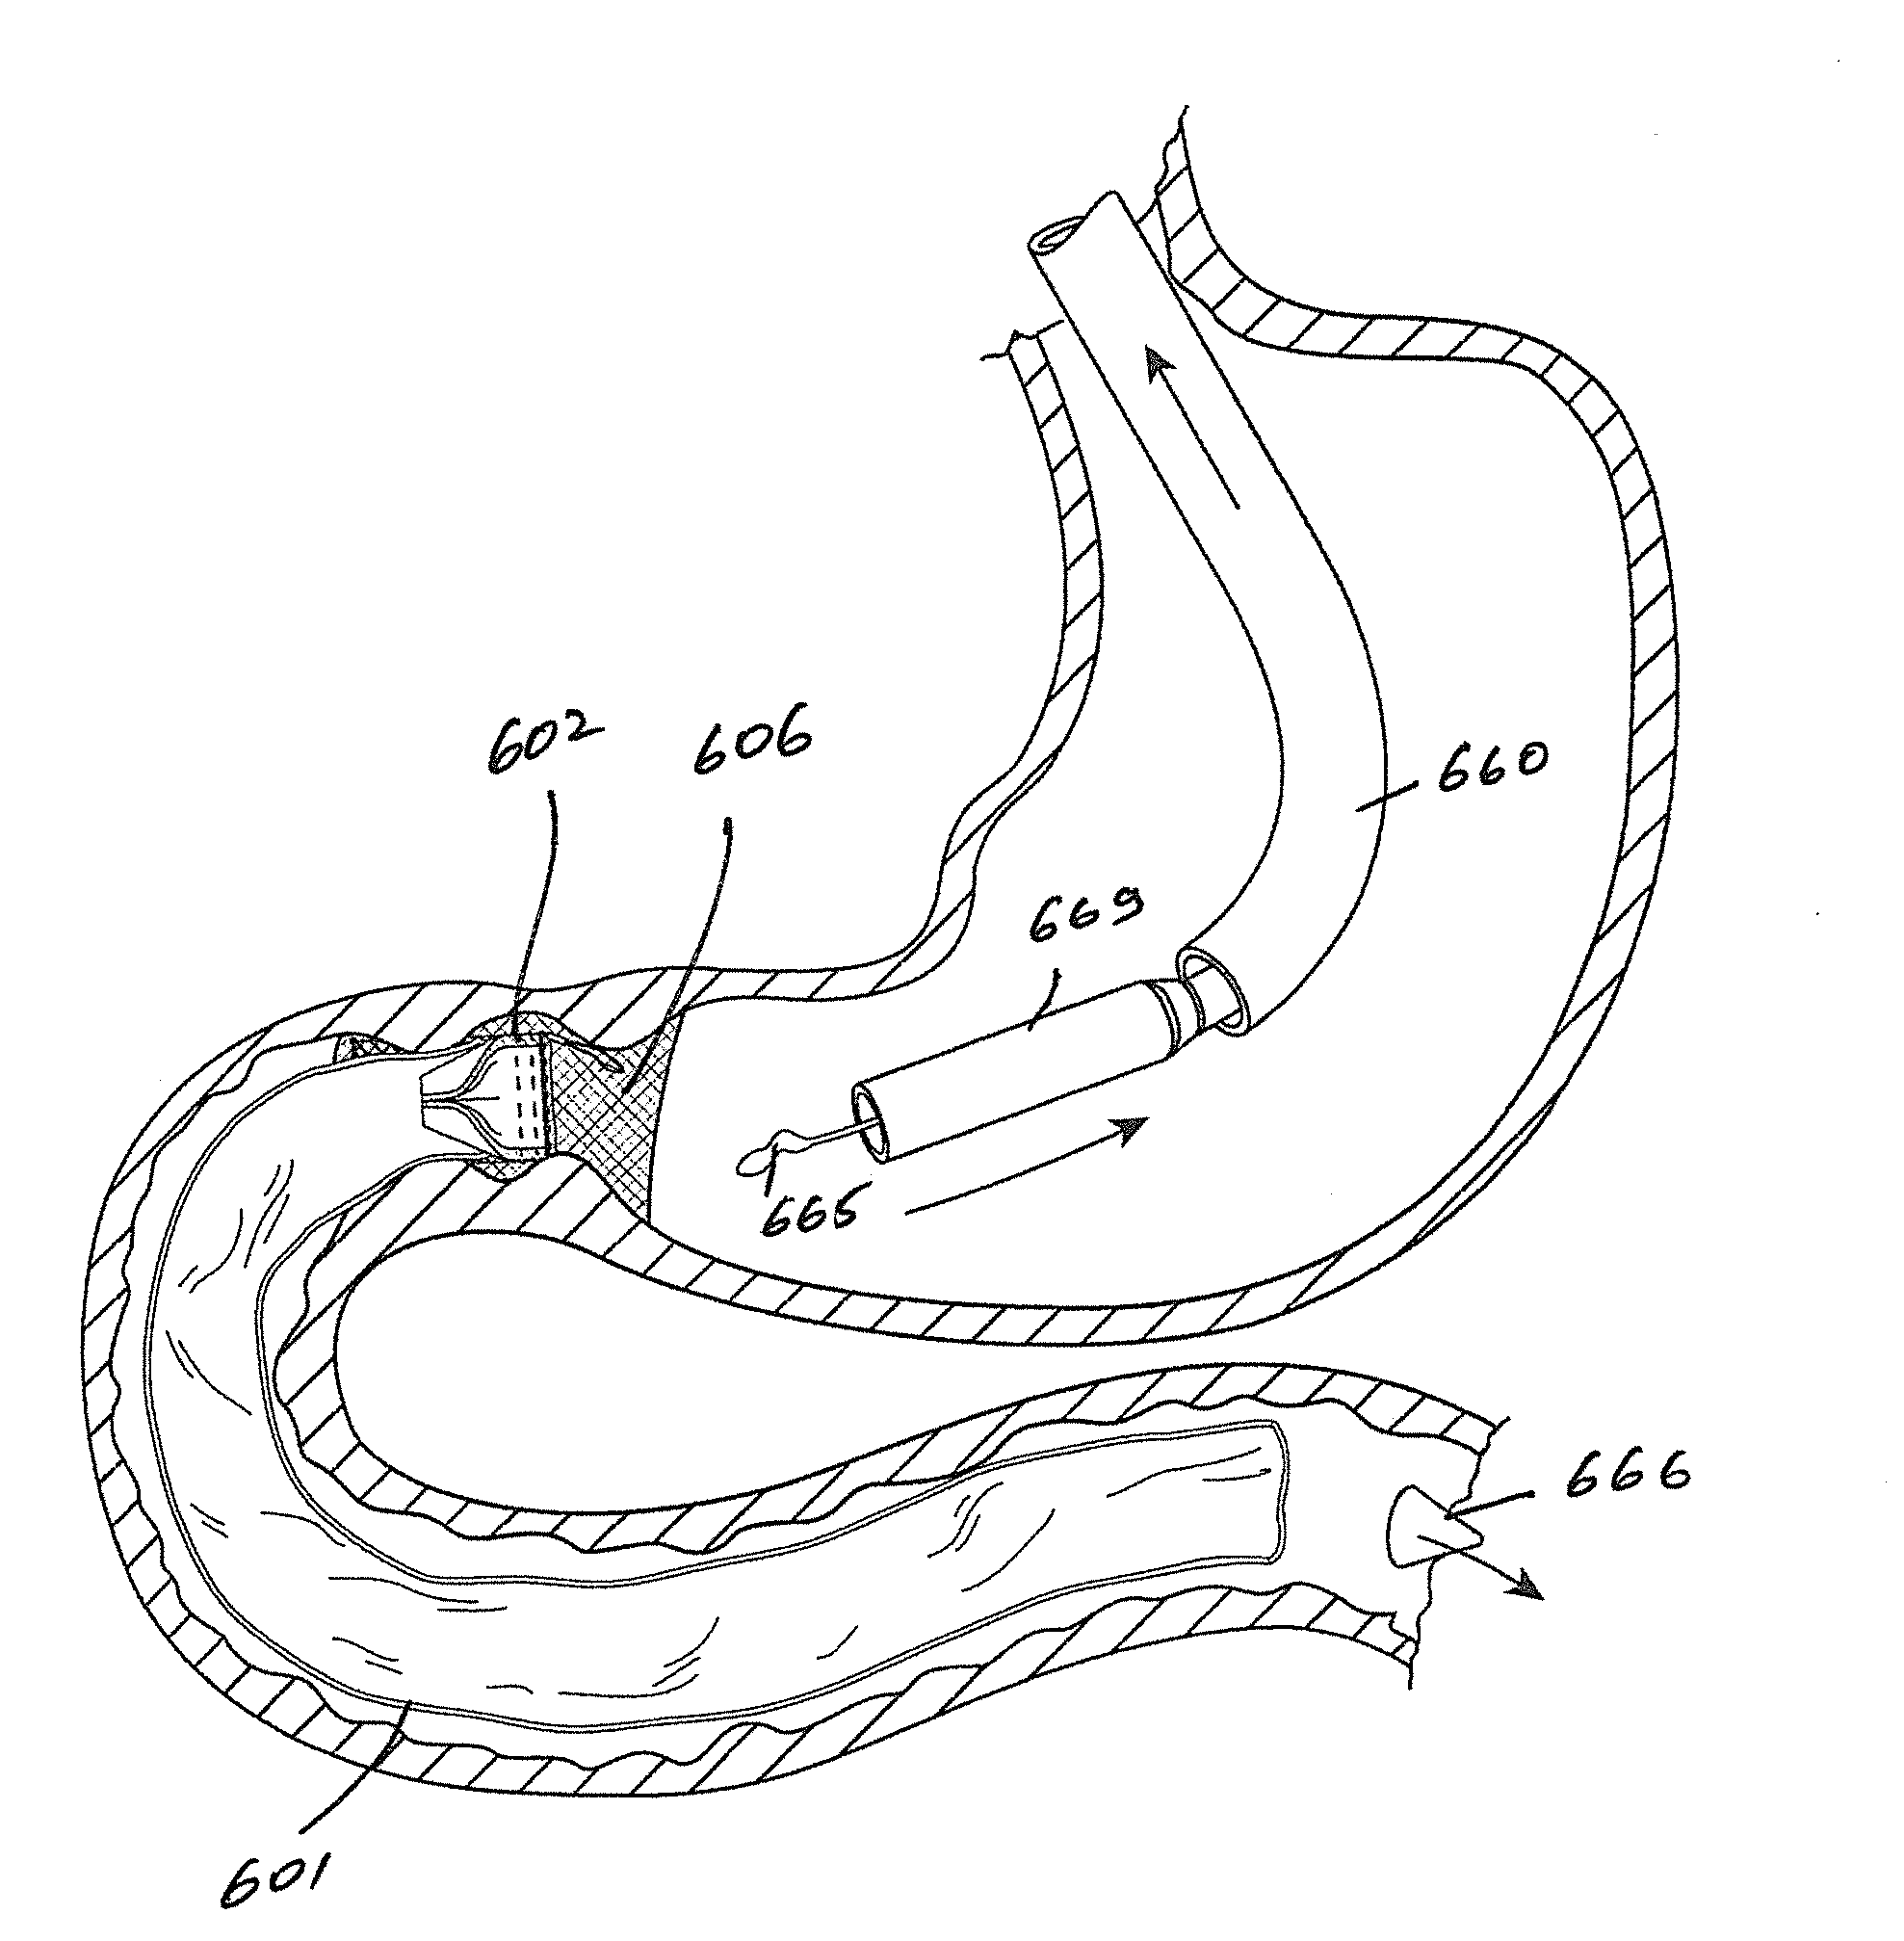 Gastrointestinal implant device and delivery system therefor